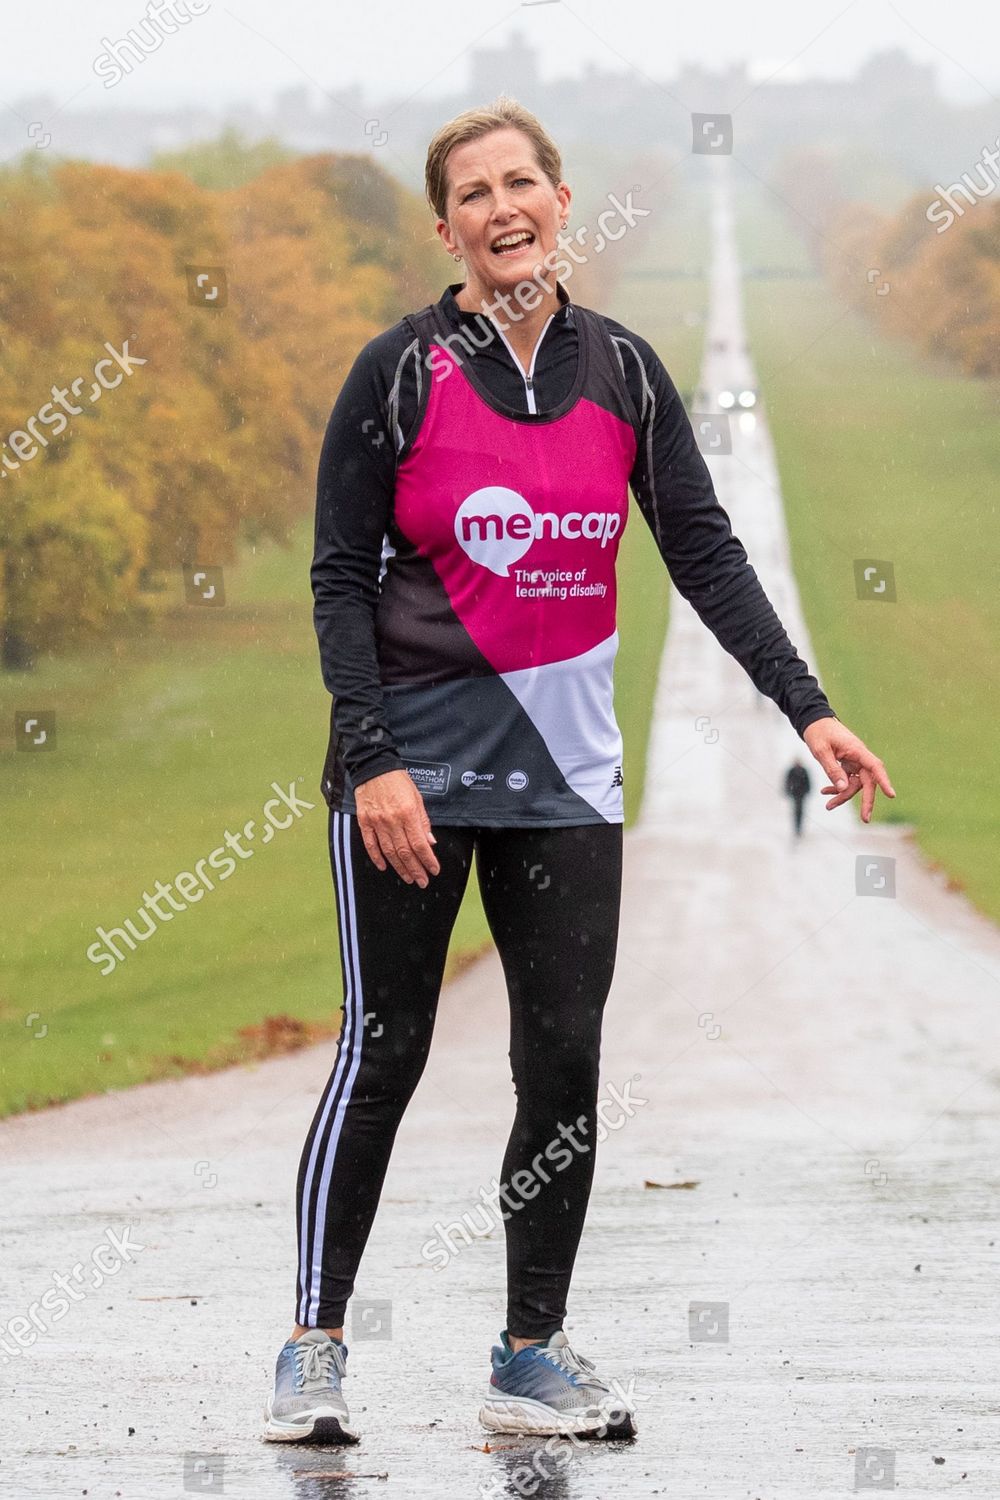 sophie-countess-of-wessex-joins-with-mencaps-learning-disability-running-team-windsor-uk-shutterstock-editorial-10876999az.jpg